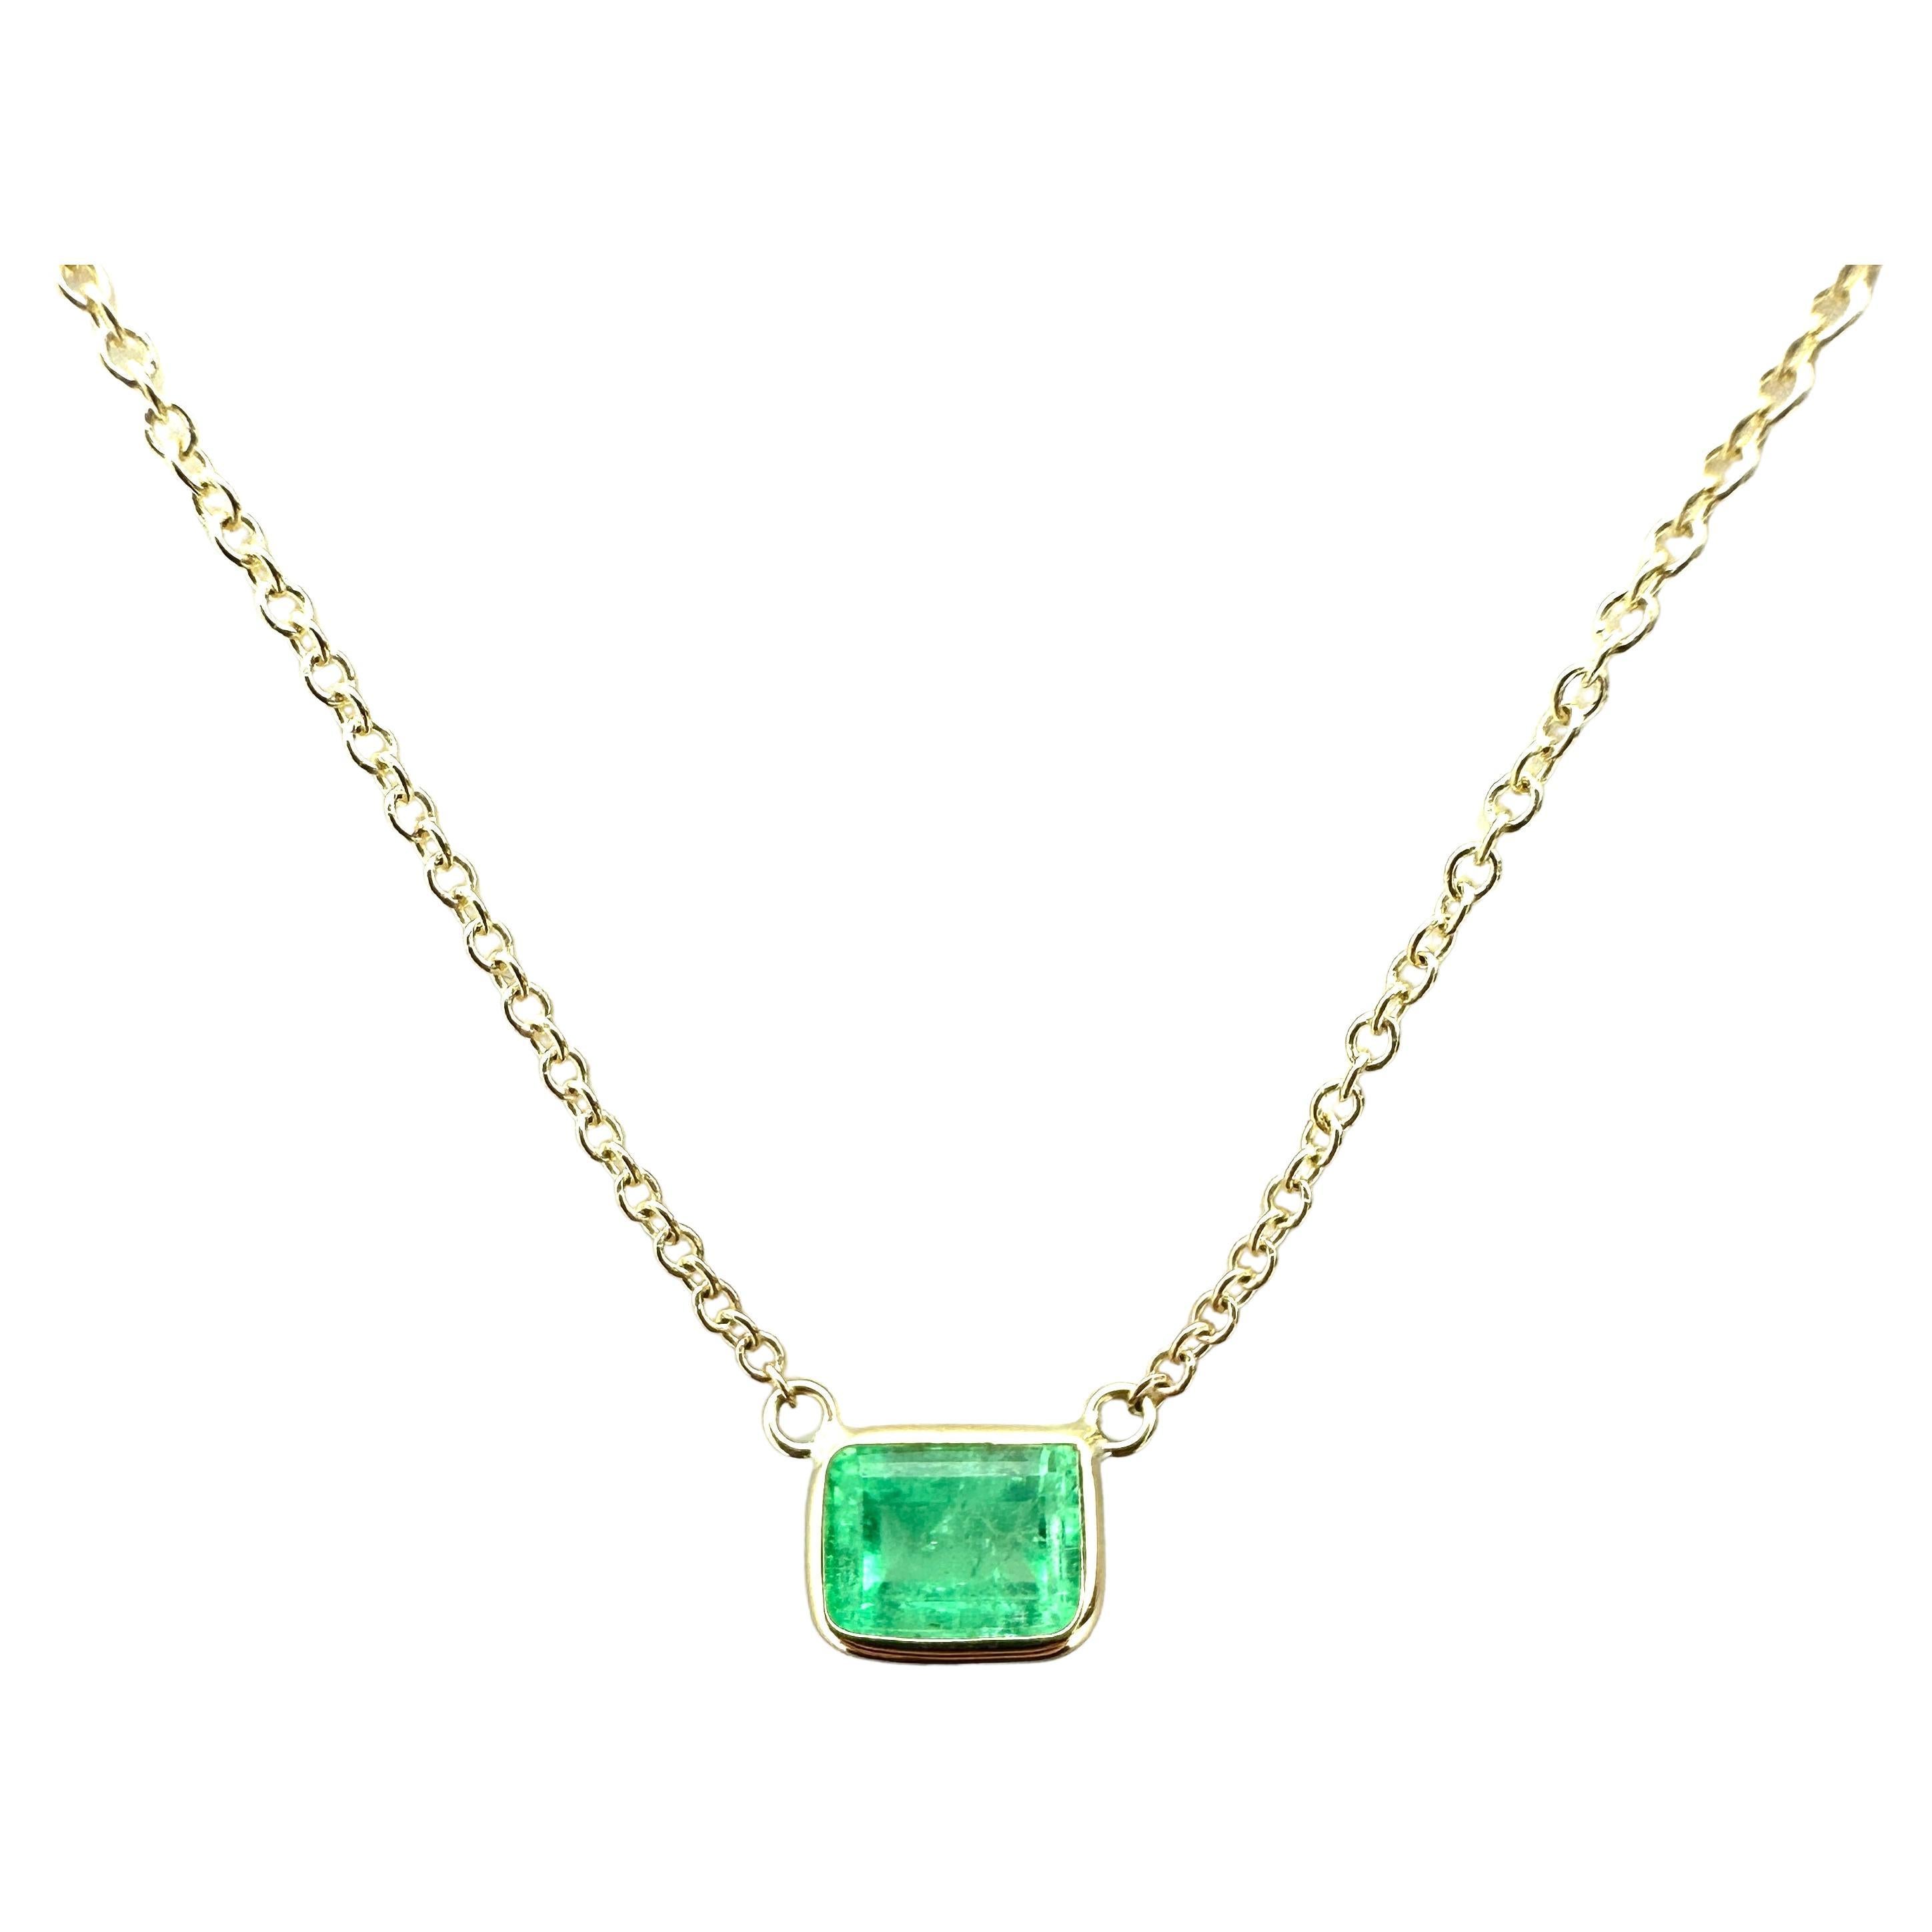 1.09 Carat Weight Green Emerald Emerald Cut Solitaire Necklace in 14k Yellow G For Sale